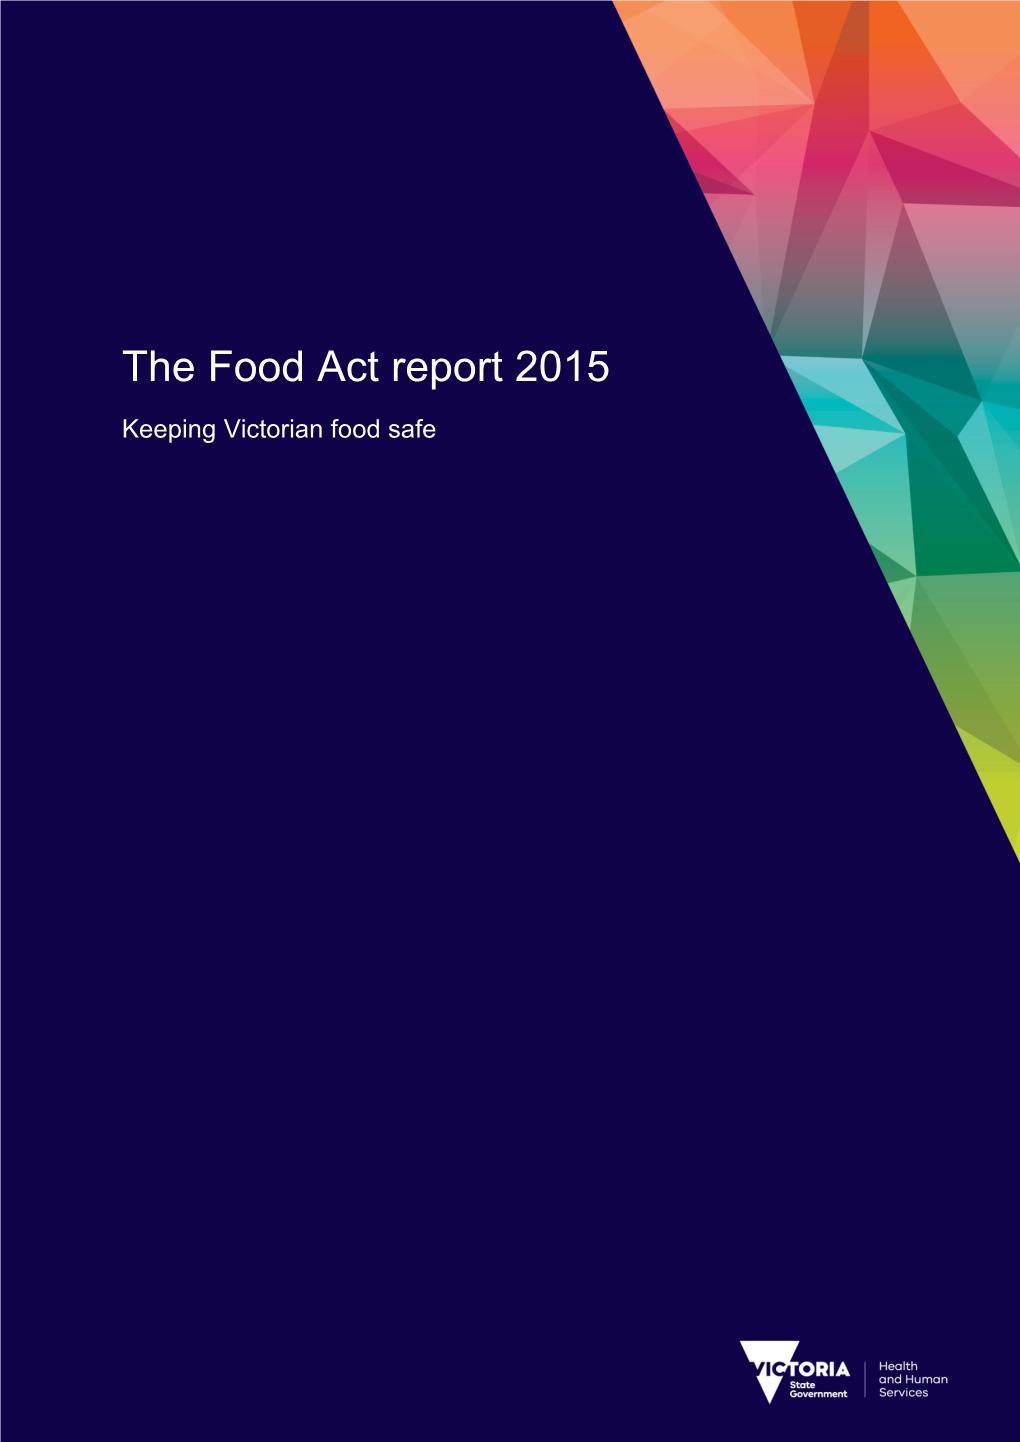 The Food Act Report 2015